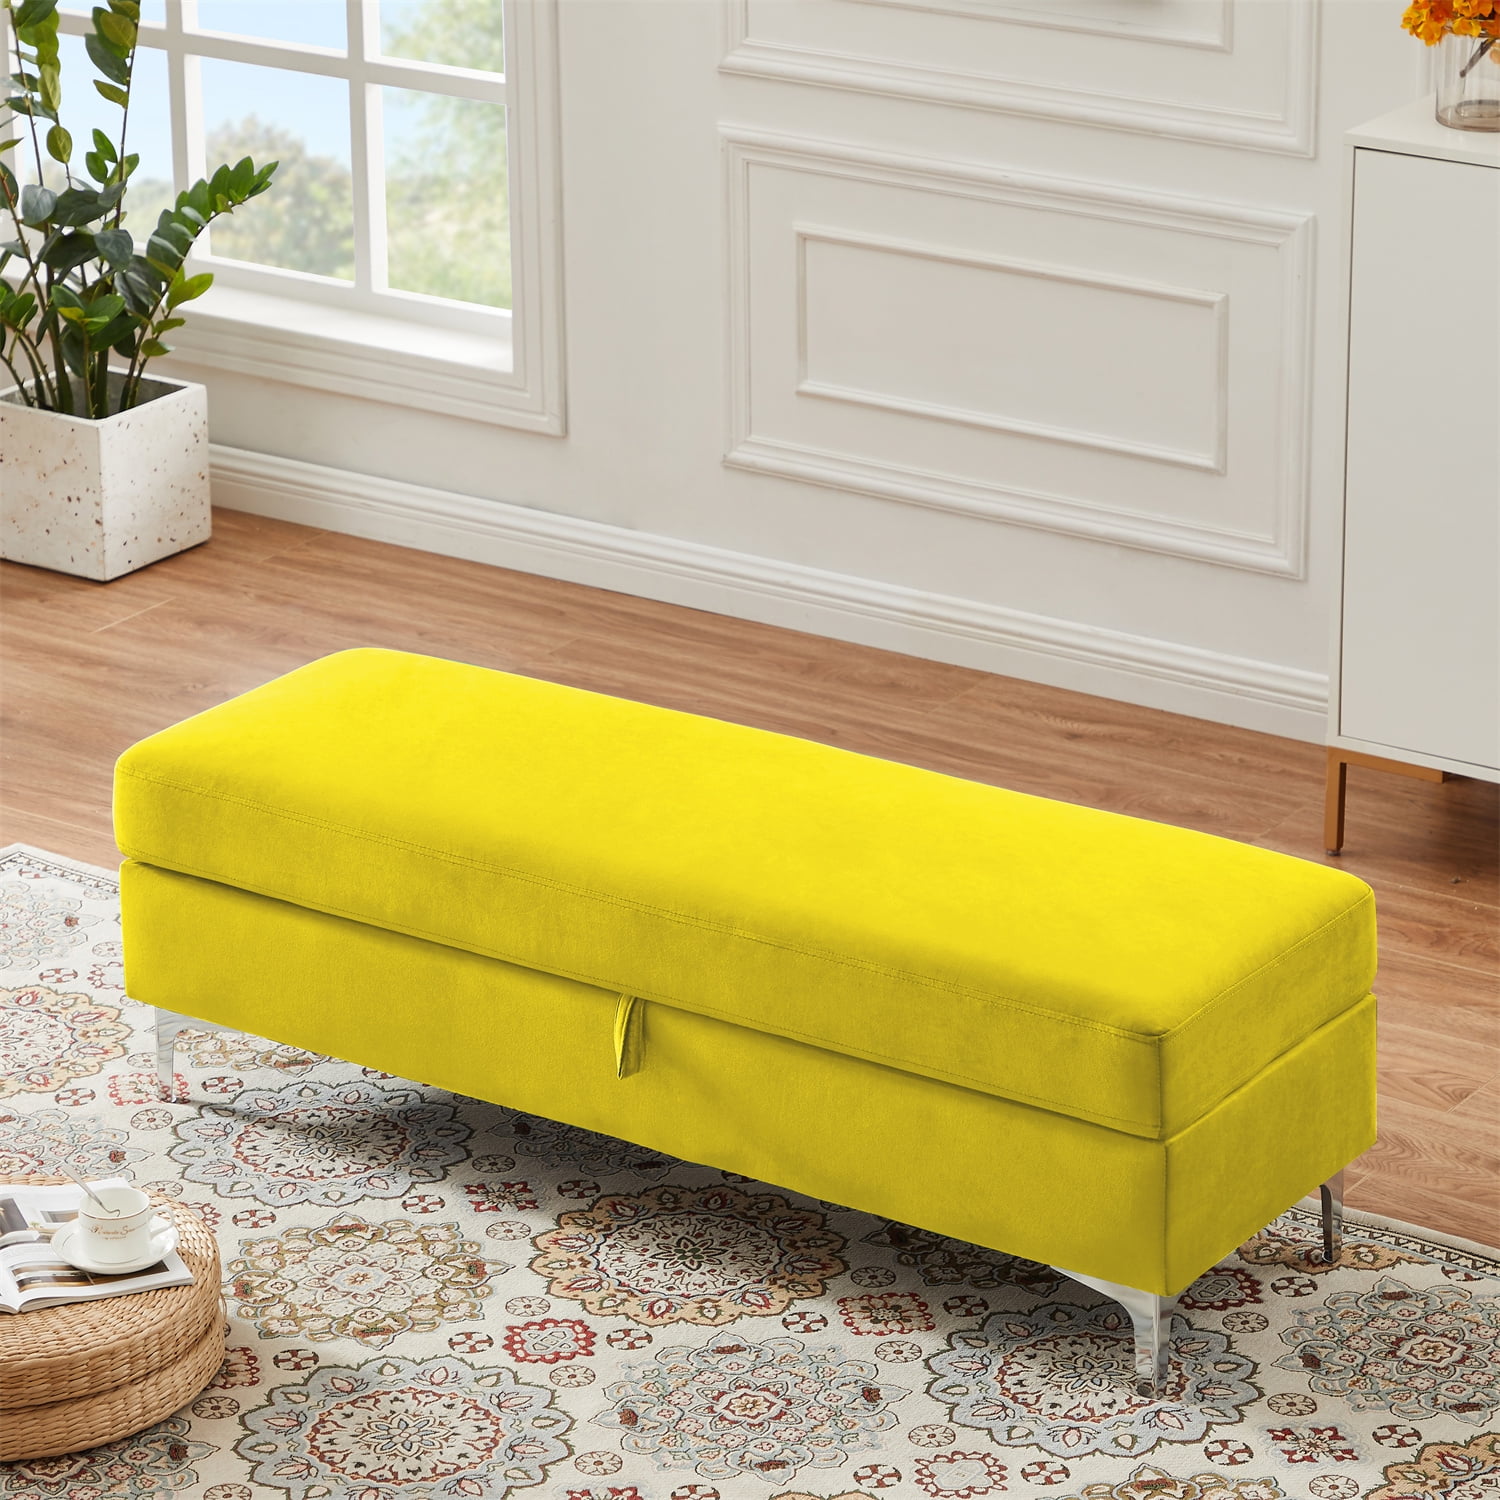 Details about   Luxury Mustard/Gold Metal Storage Trunk Ottoman Chest Bench Bedroom Living Room 